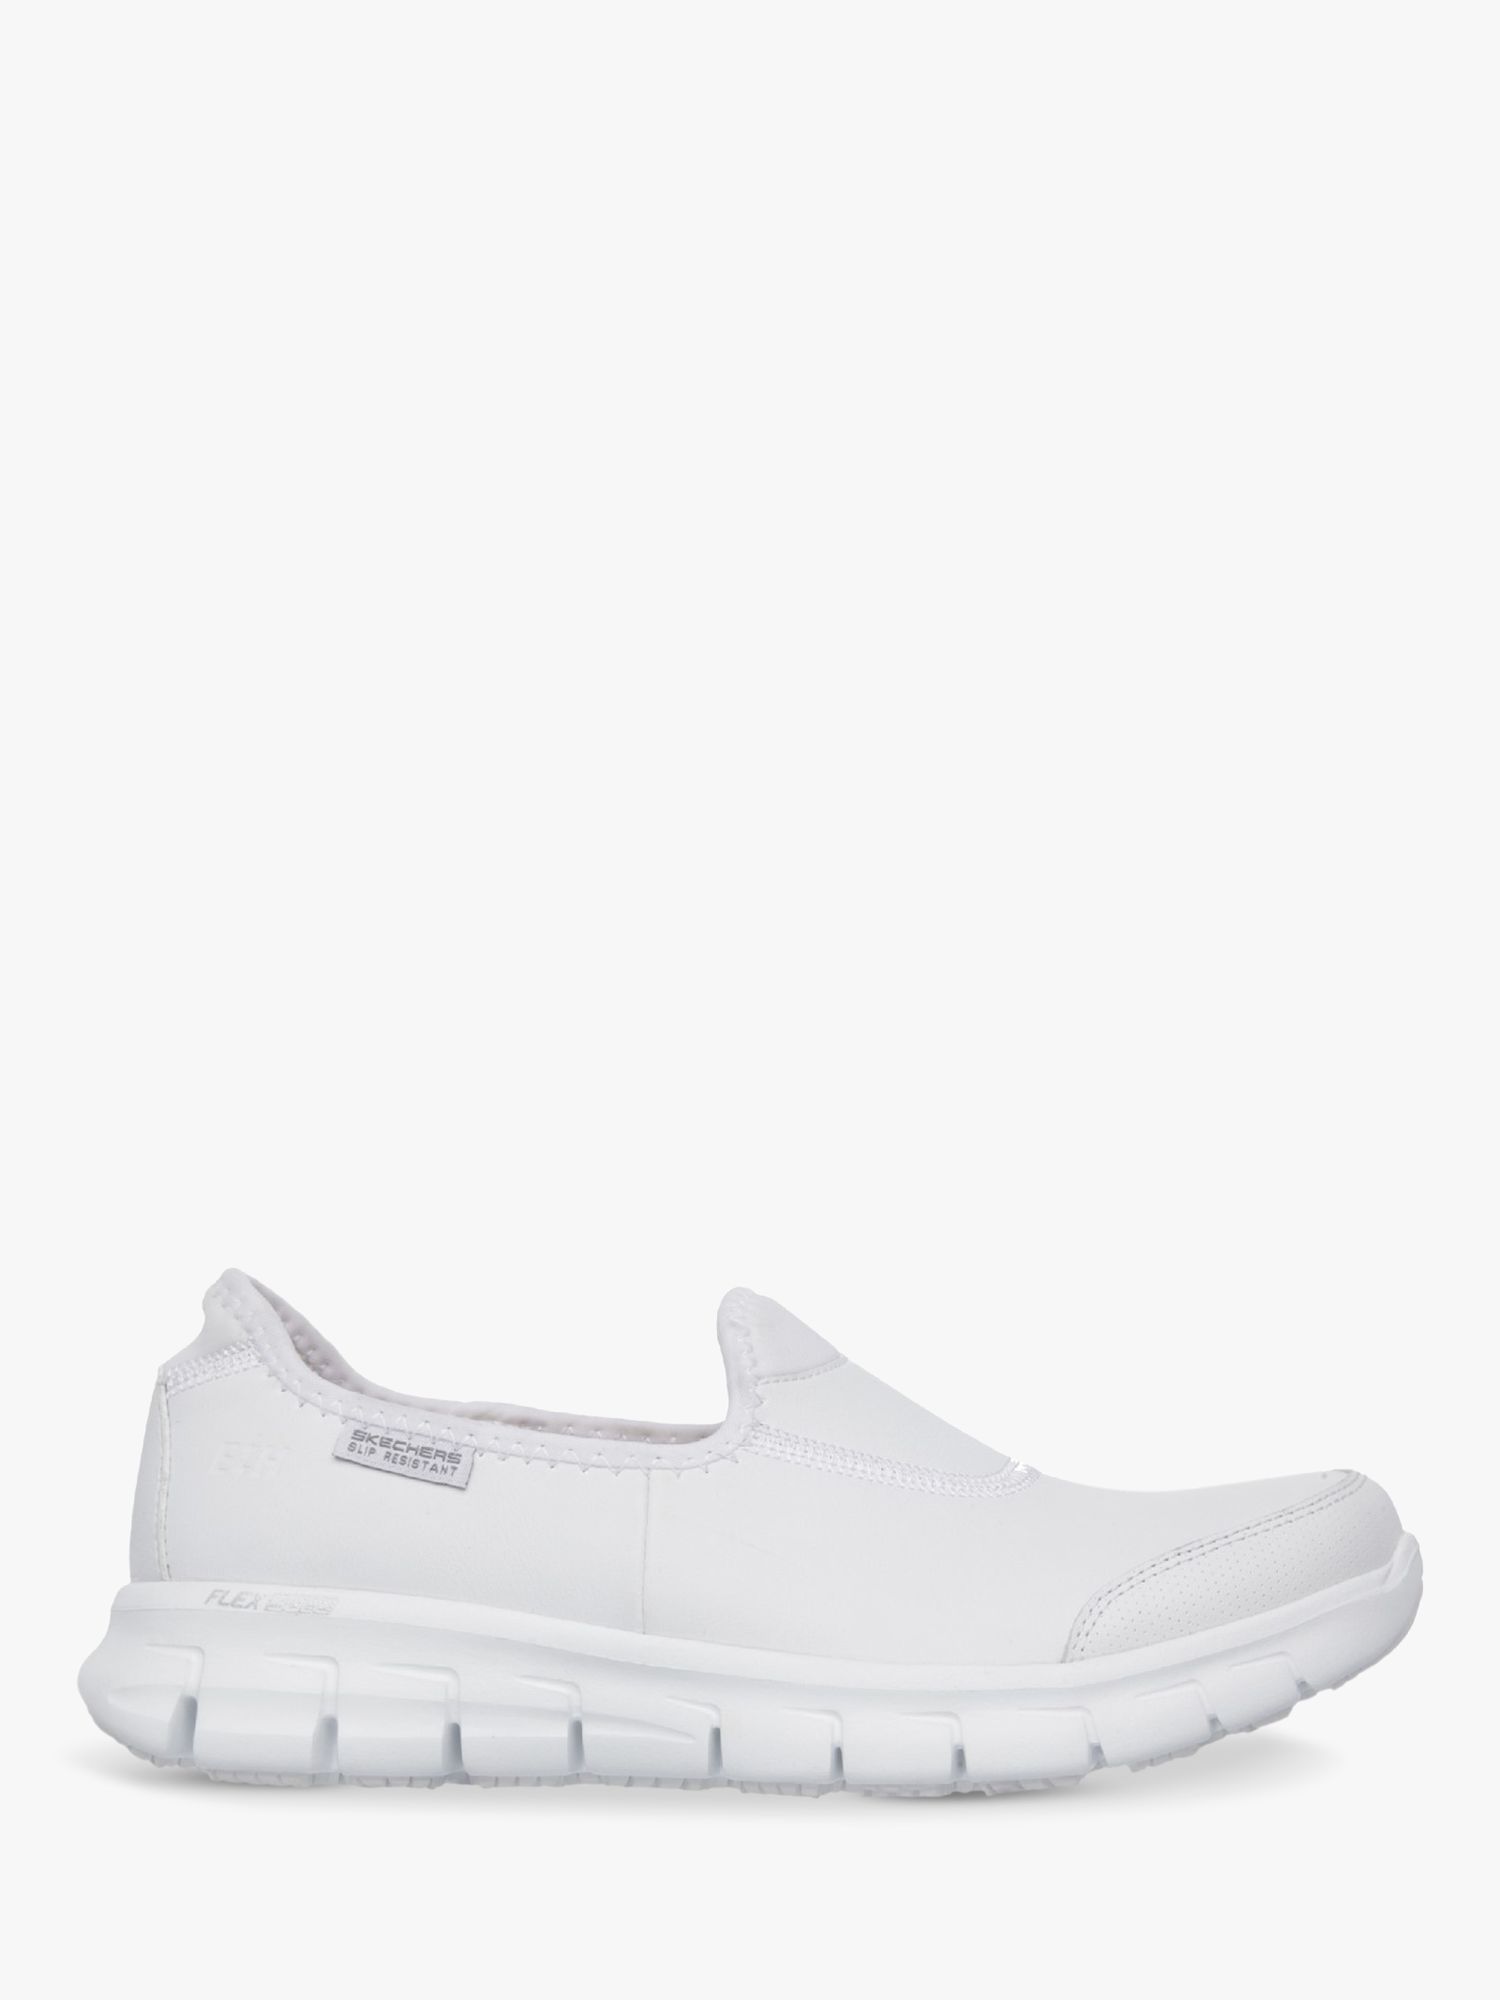 Skechers Sure Slip Resistant Leather Trainers, White John Lewis & Partners